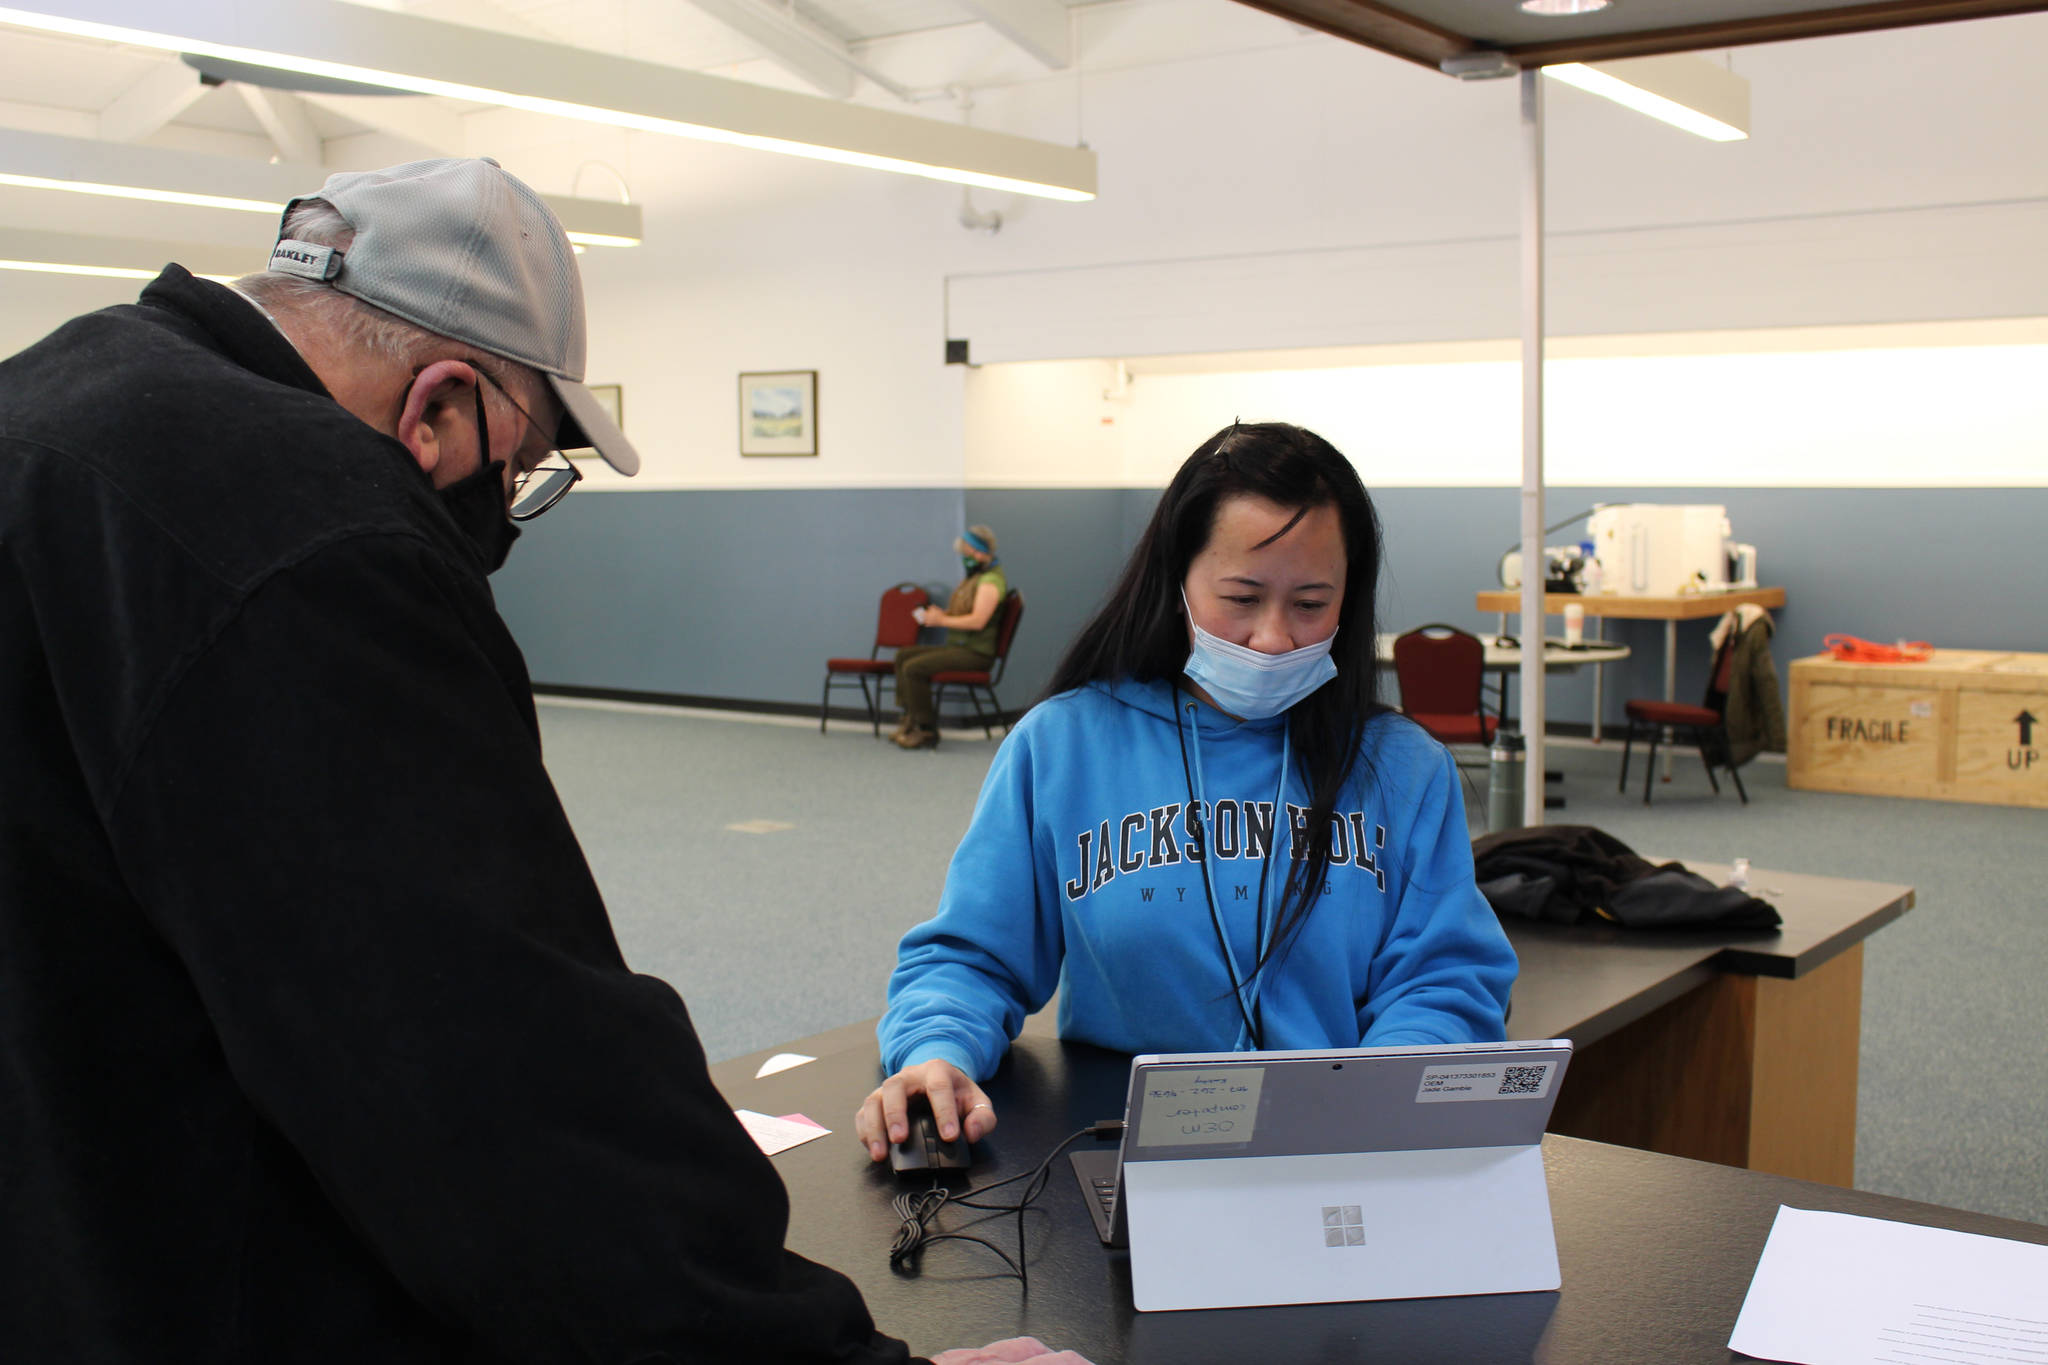 Kenai Peninsula Borough employee Kathy Trinh helps Ronald Huntsman check out after receiving his first dose of the Moderna COVID-19 vaccine during a clinic at the Nikiski Community Recreation Center on Jan. 30, 2021. (Photo by Brian Mazurek/Peninsula Clarion)